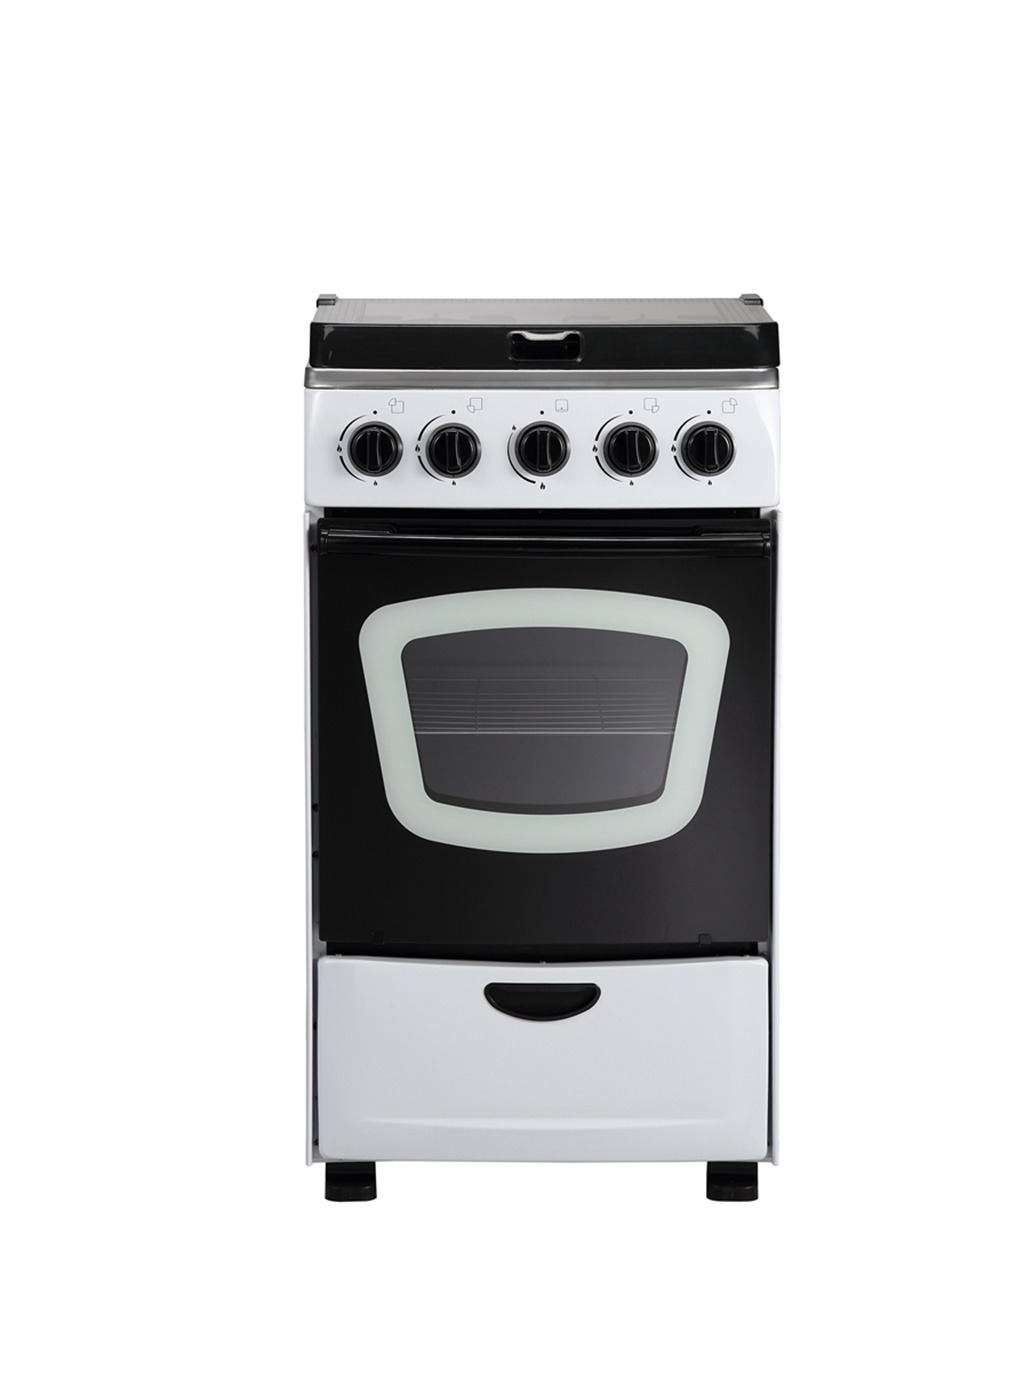 20 Inches Wide Freestanding Electric Oven Range